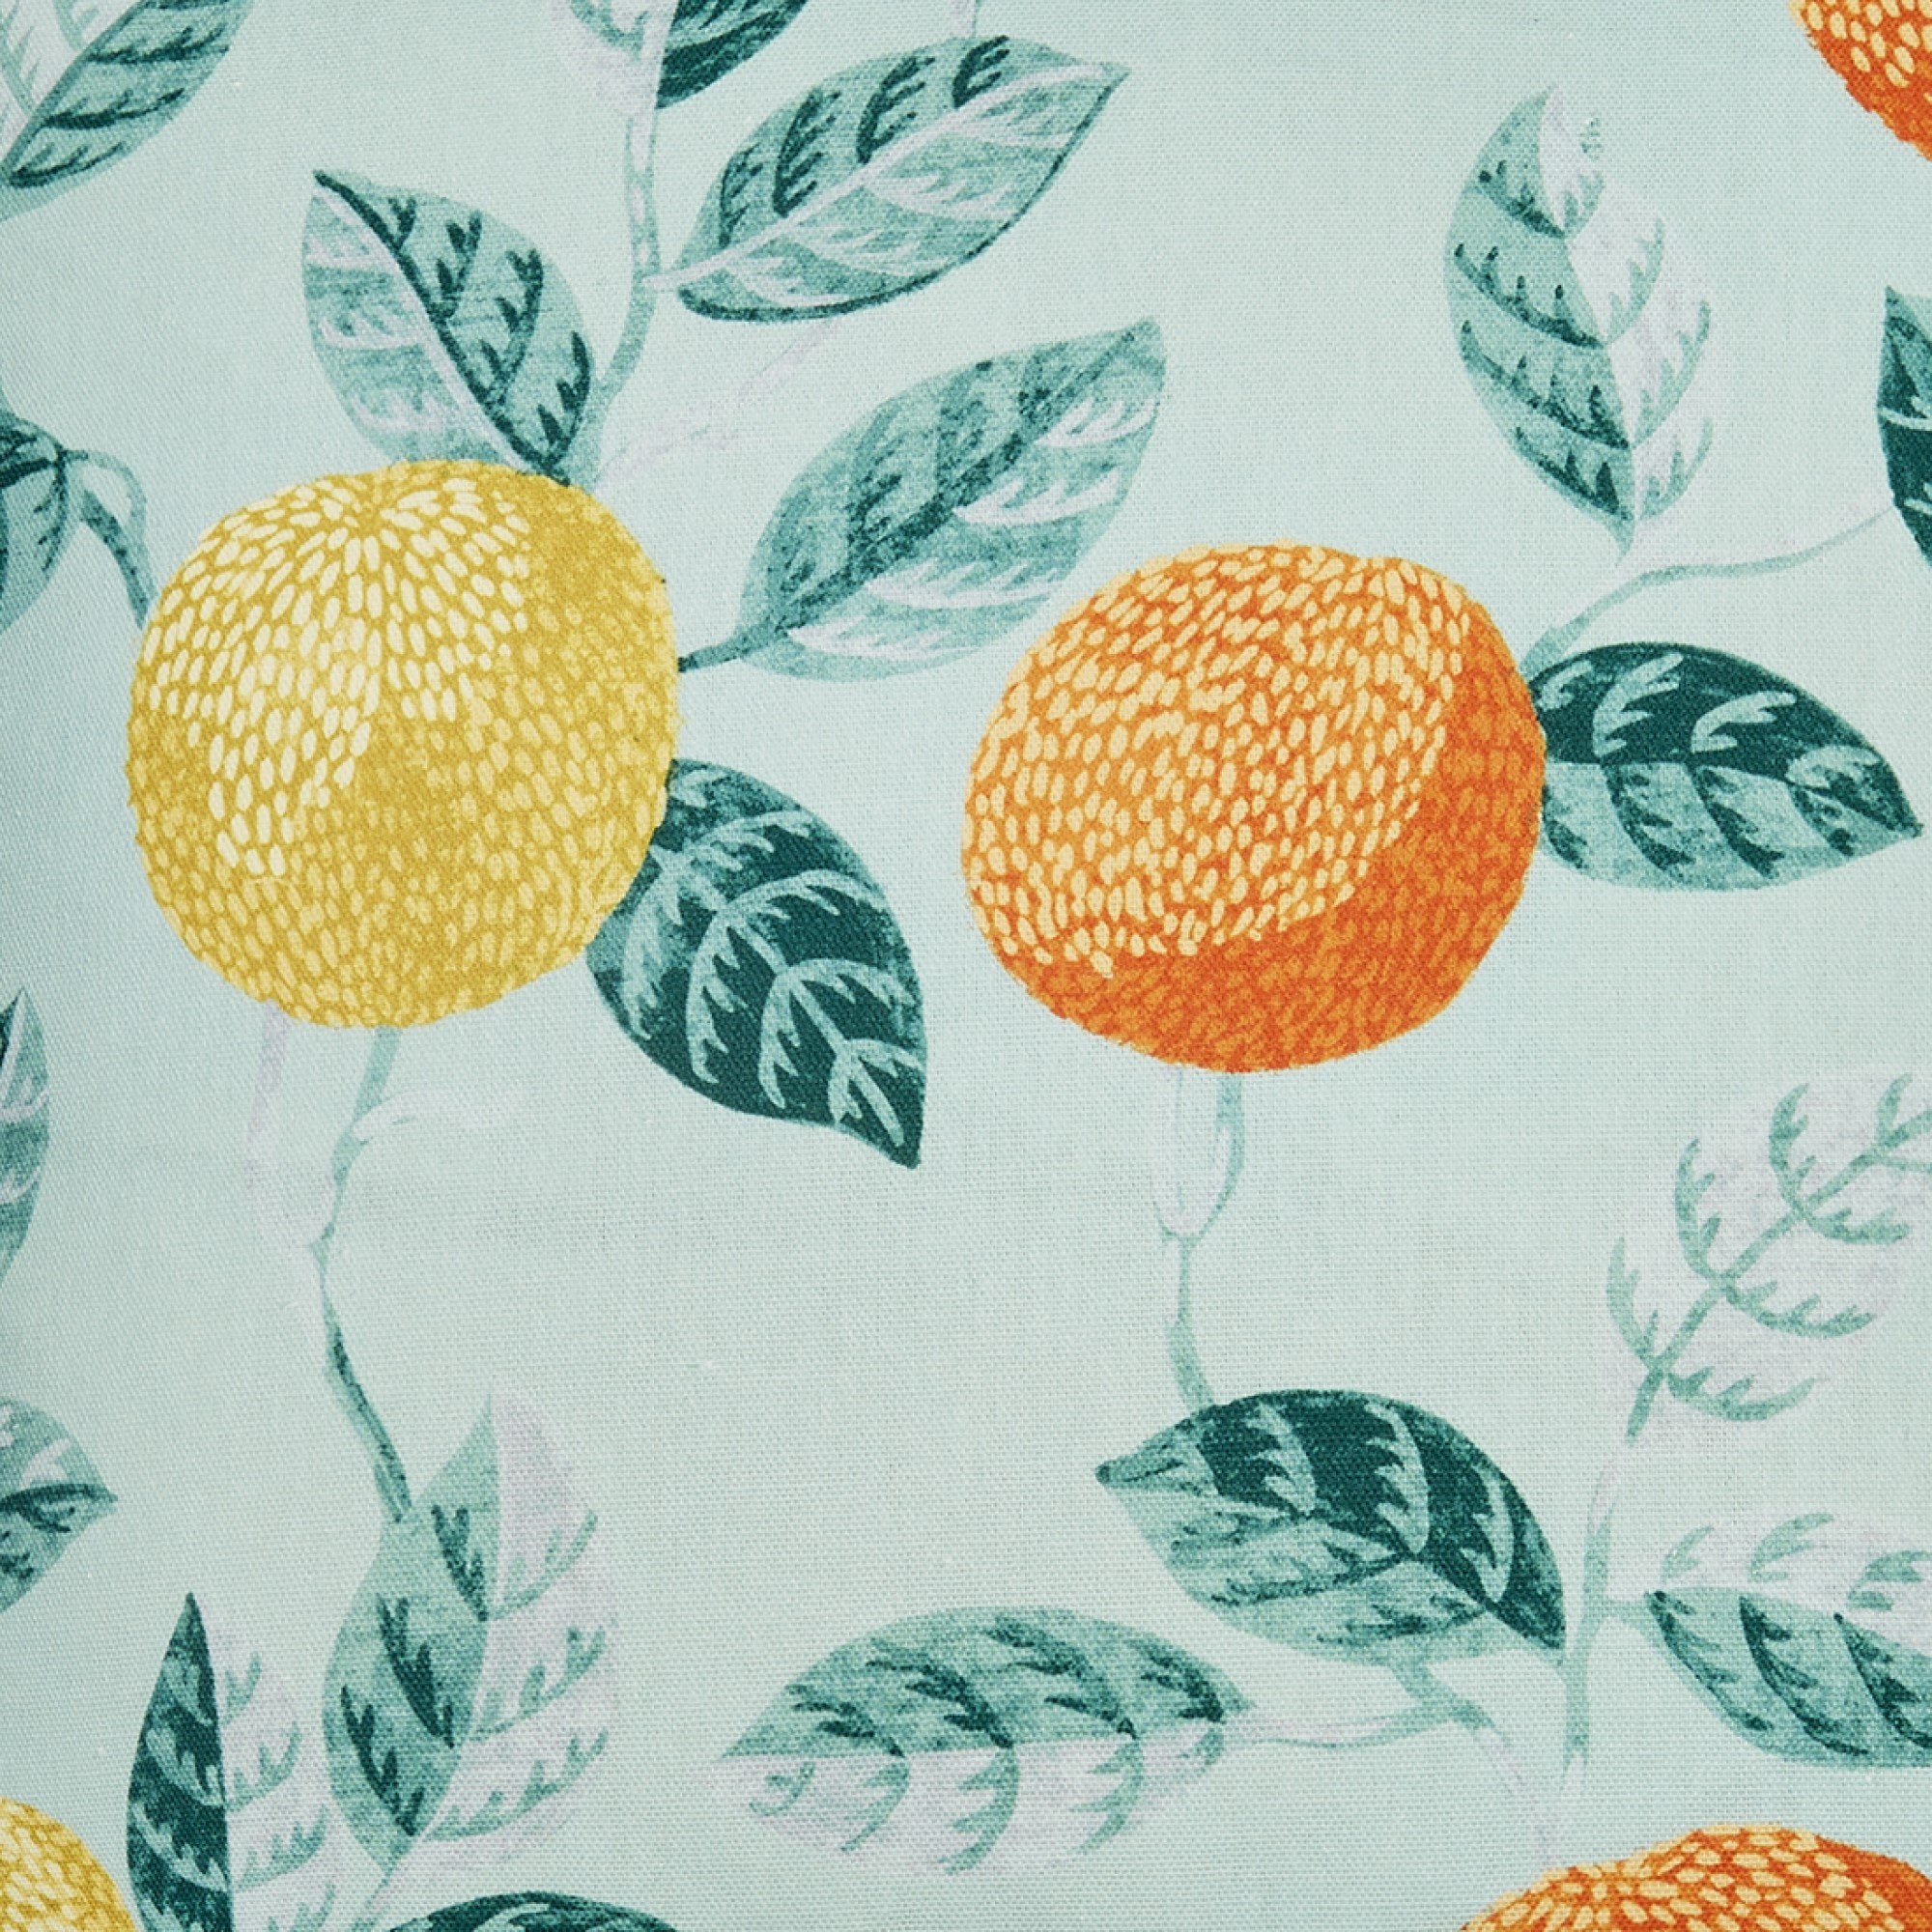 Cushion Botanical Fruits Outdoor by Dreams & Drapes Design in Green